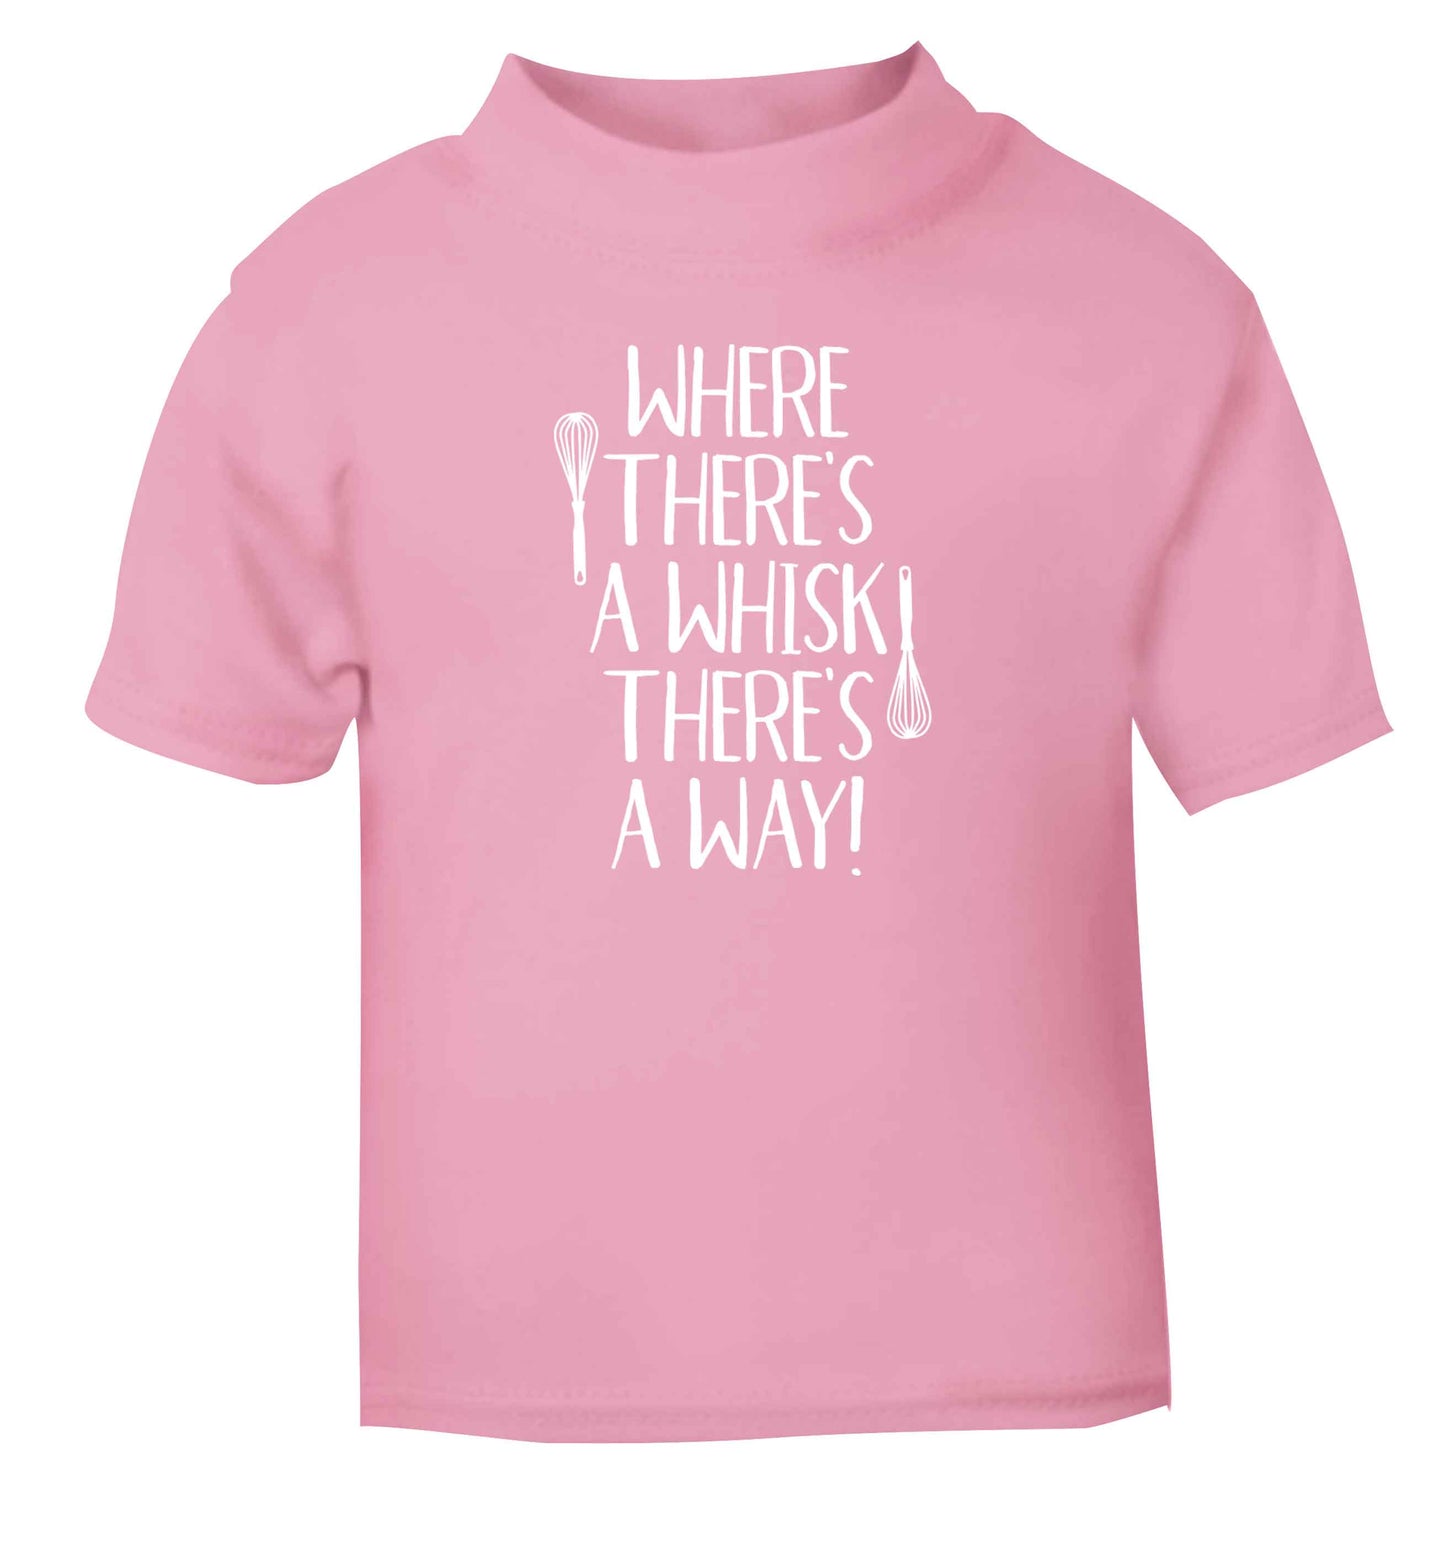 Where there's a whisk there's a way light pink Baby Toddler Tshirt 2 Years